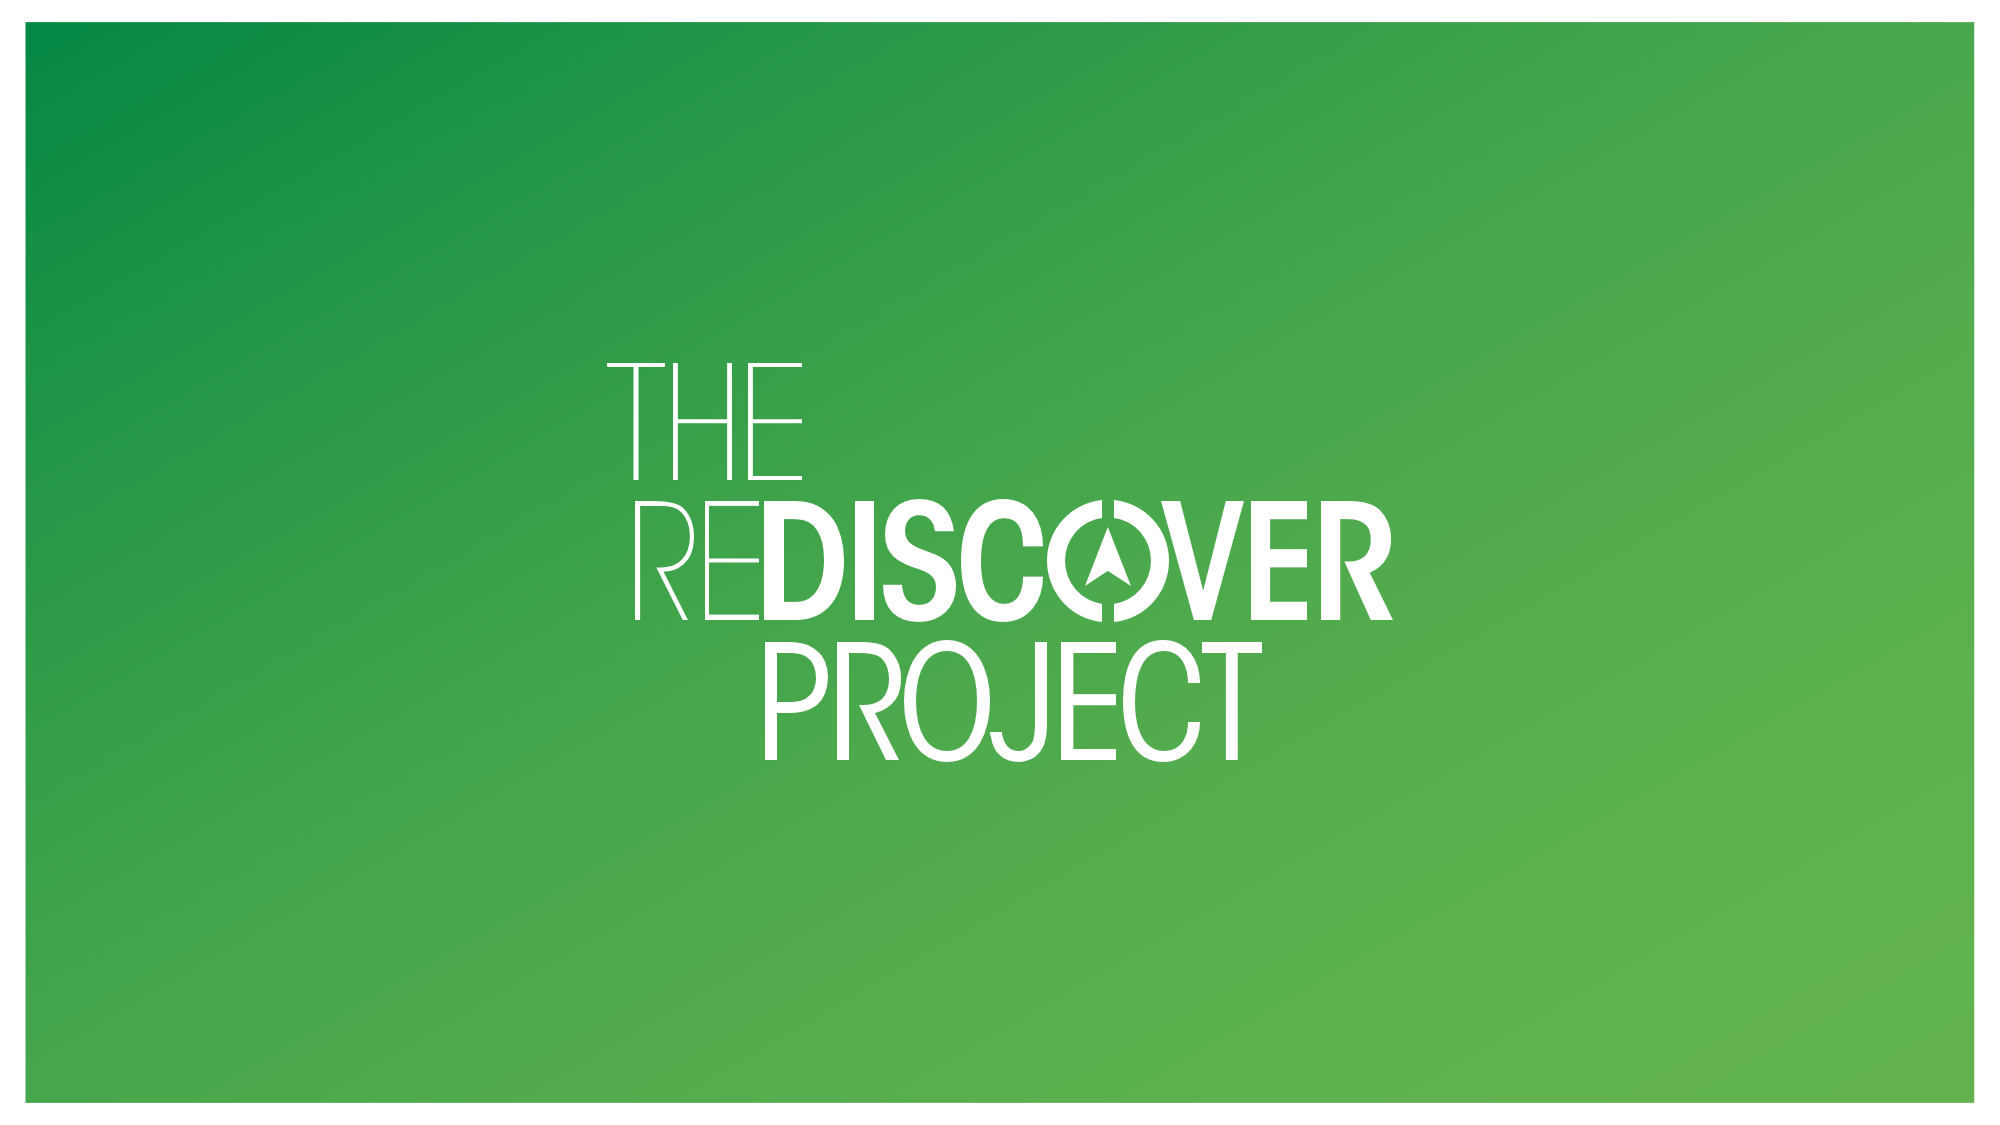 The ReDiscover Project